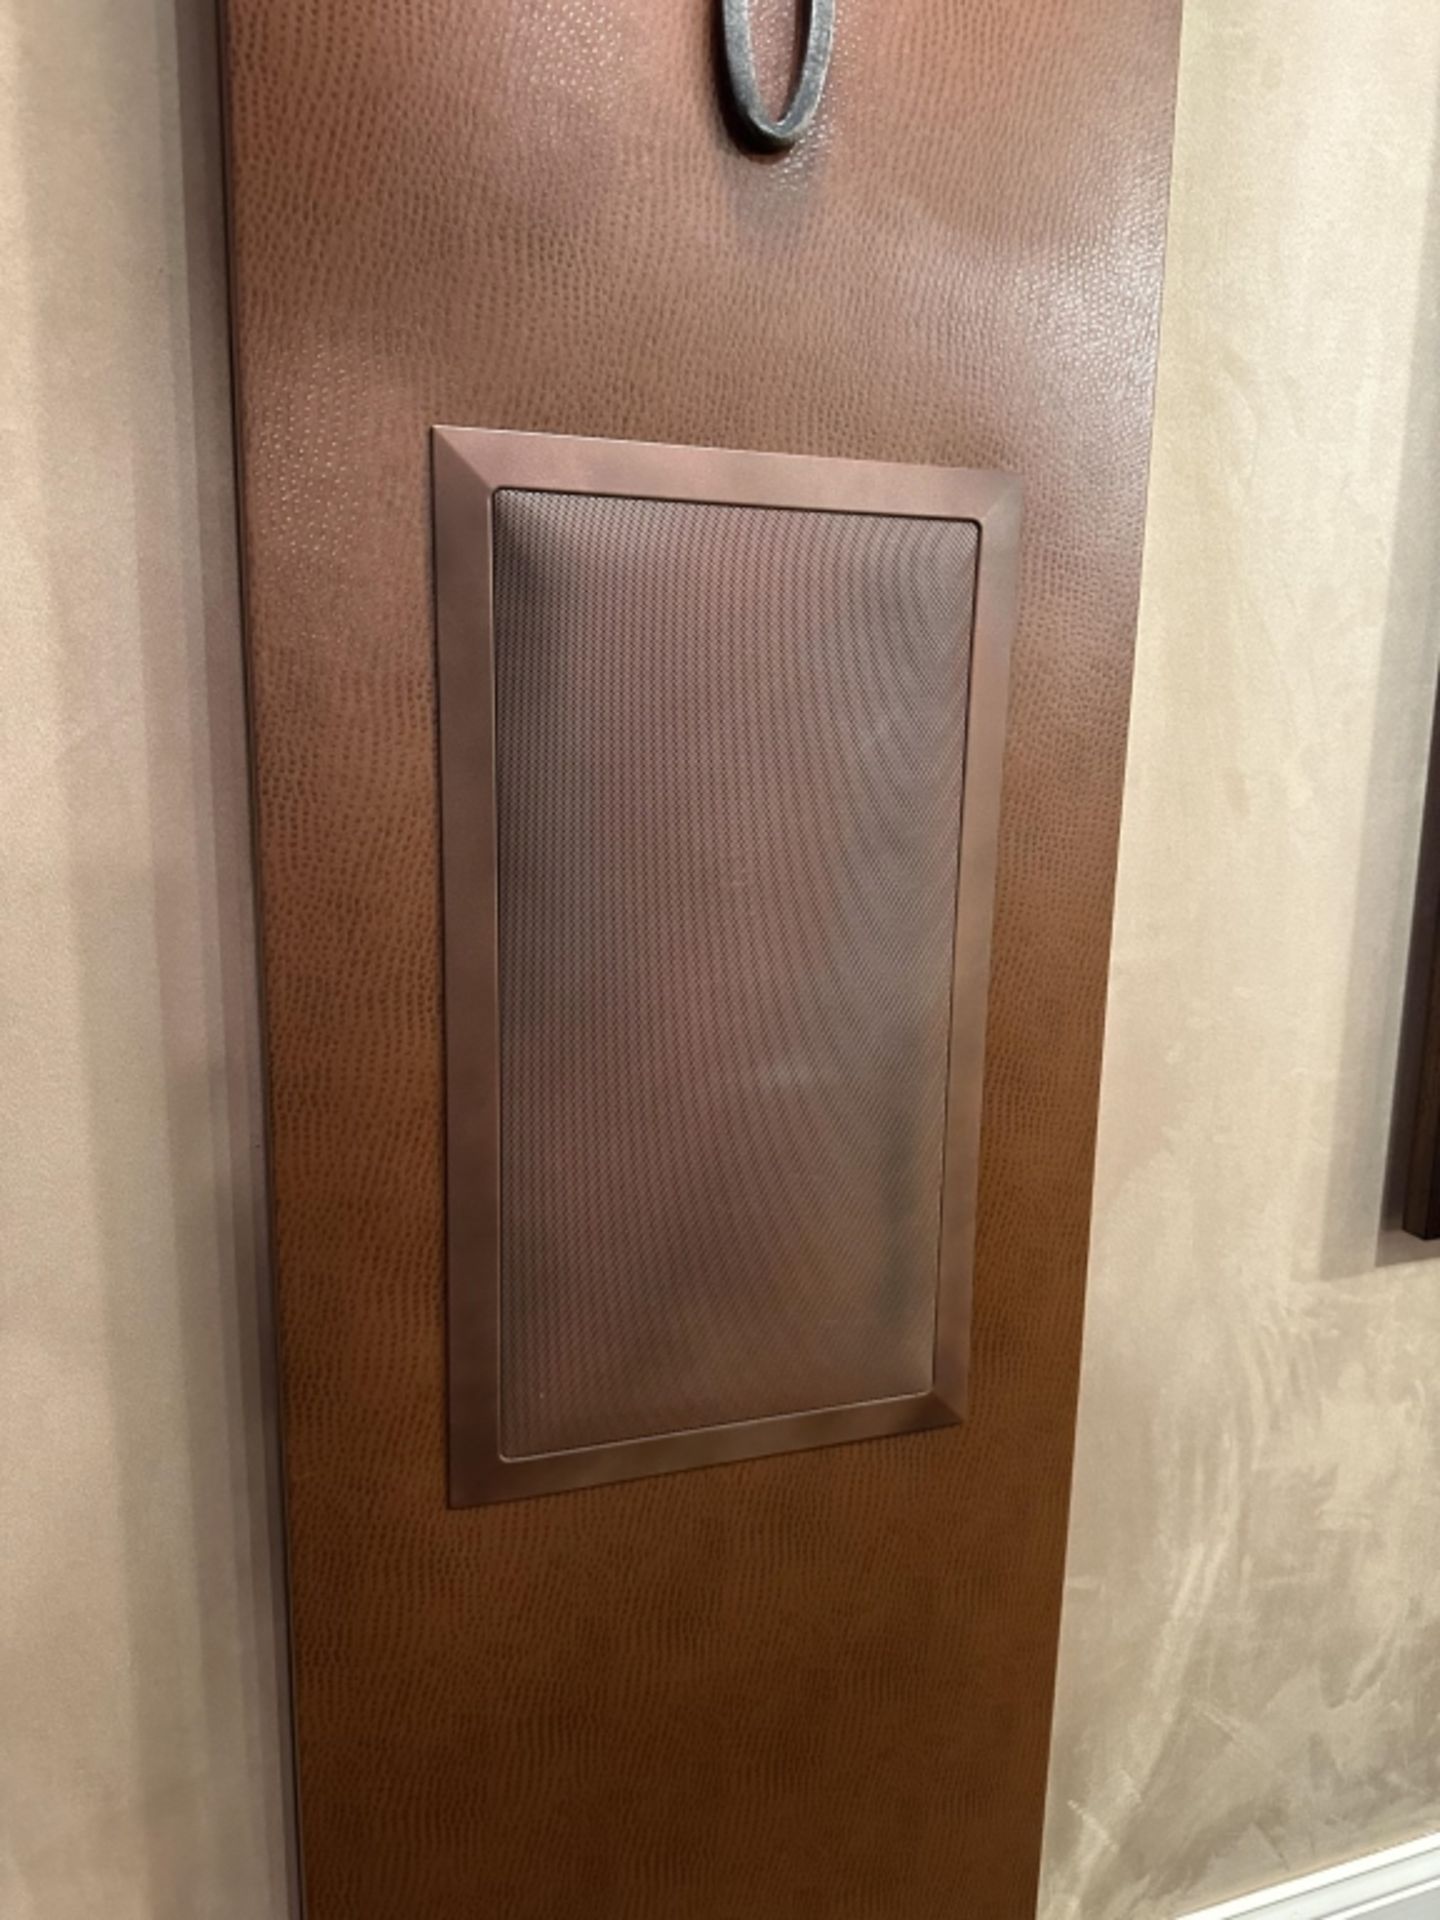 LOT CONSISTING OF (6) KLIPSCH THX WALL MOUNTED SPEAKERS (PAINTED BROWN) - Image 2 of 4